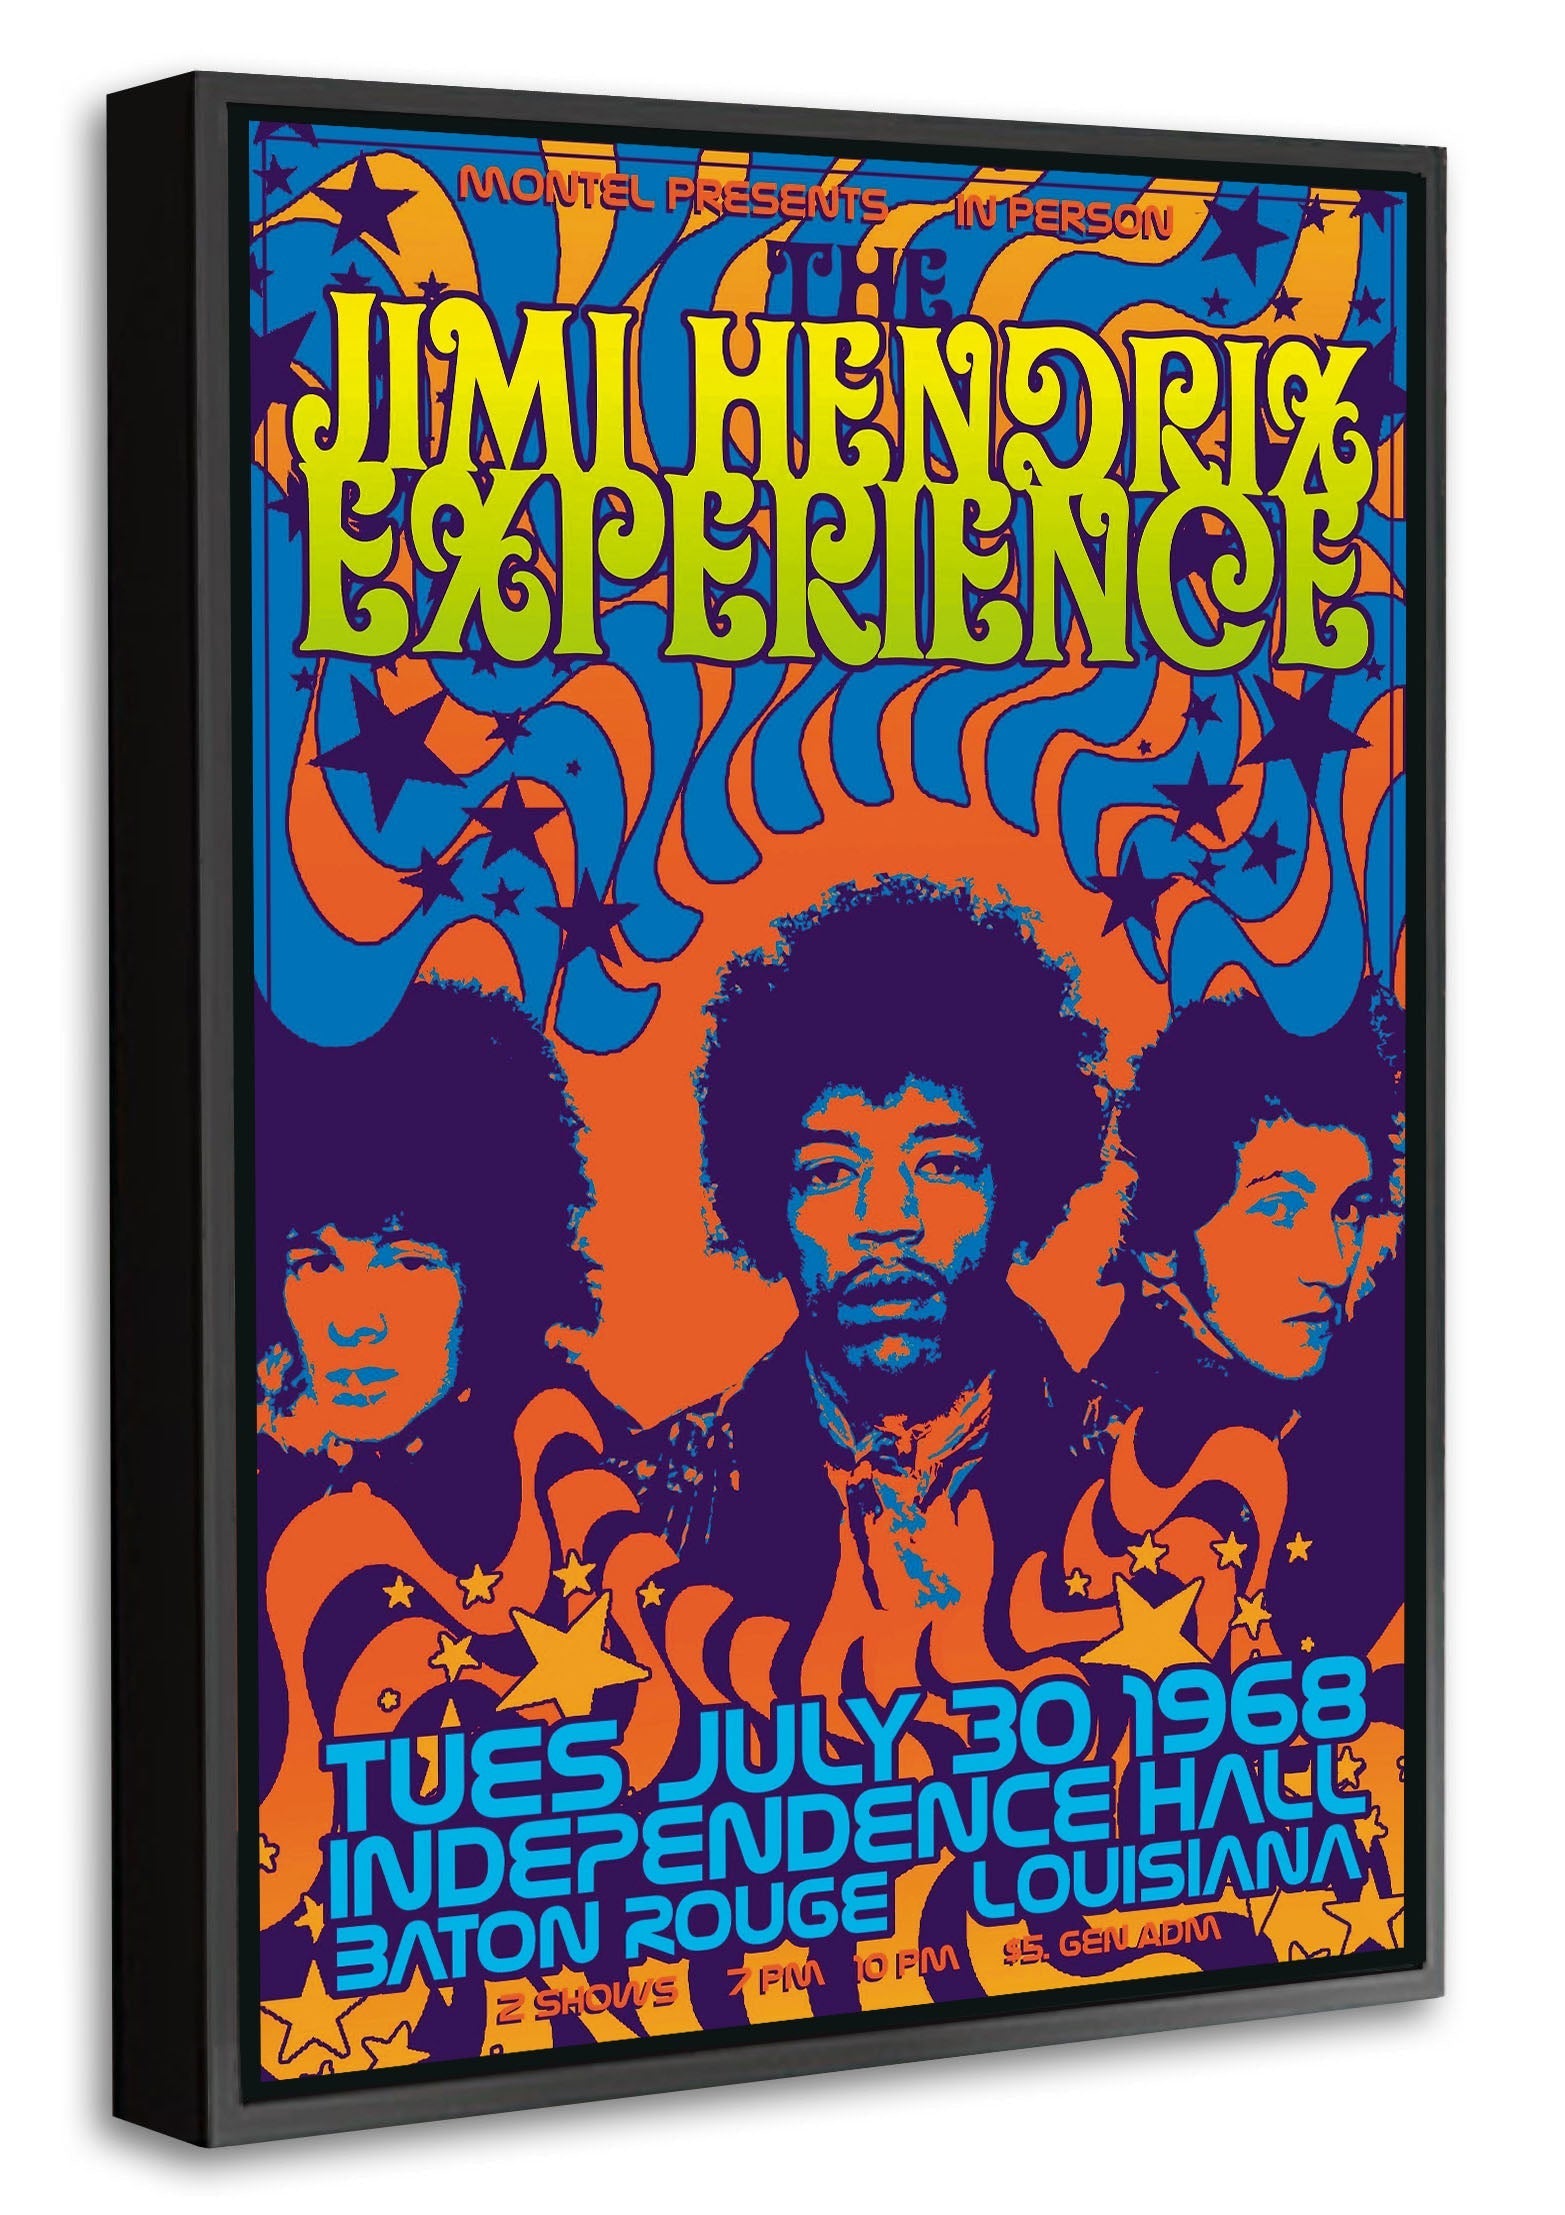 Jimi Hendrix Experience-concerts, print-Canvas Print with Box Frame-40 x 60 cm-BLUE SHAKER